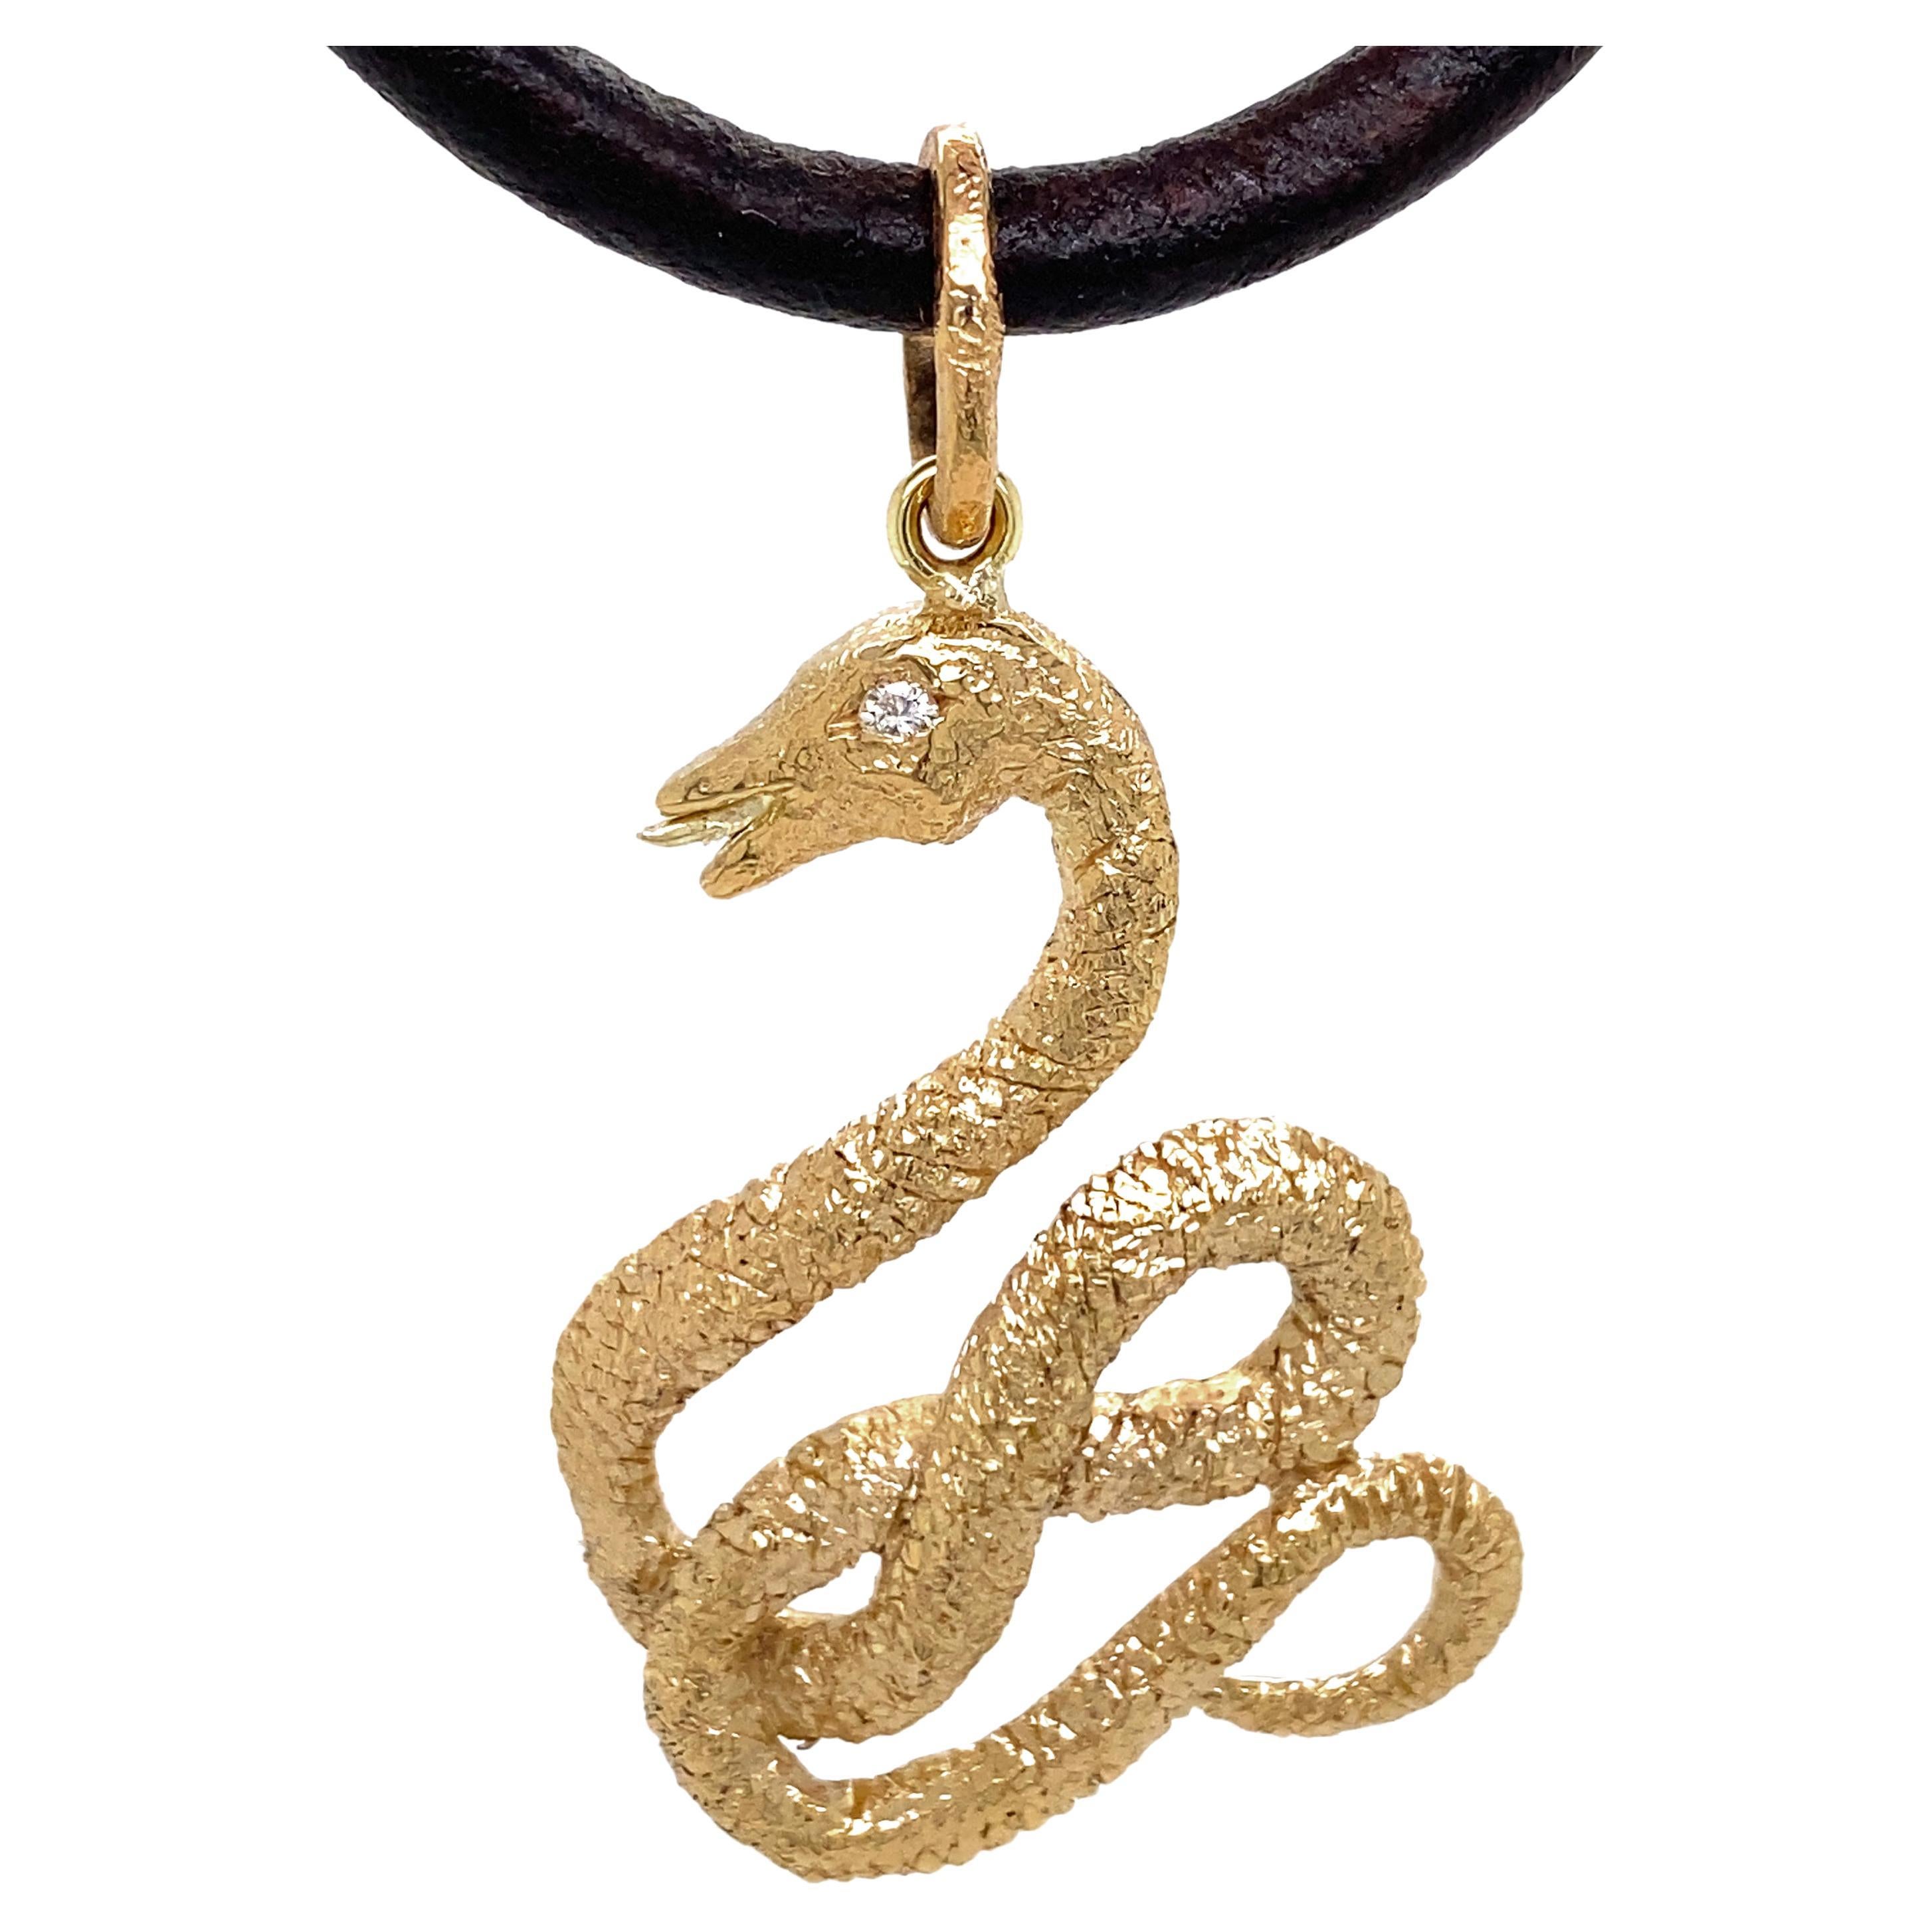 "Mr. Big Snake" Figural Pendant or Fob in Textured Yellow Gold w Diamond Eye For Sale